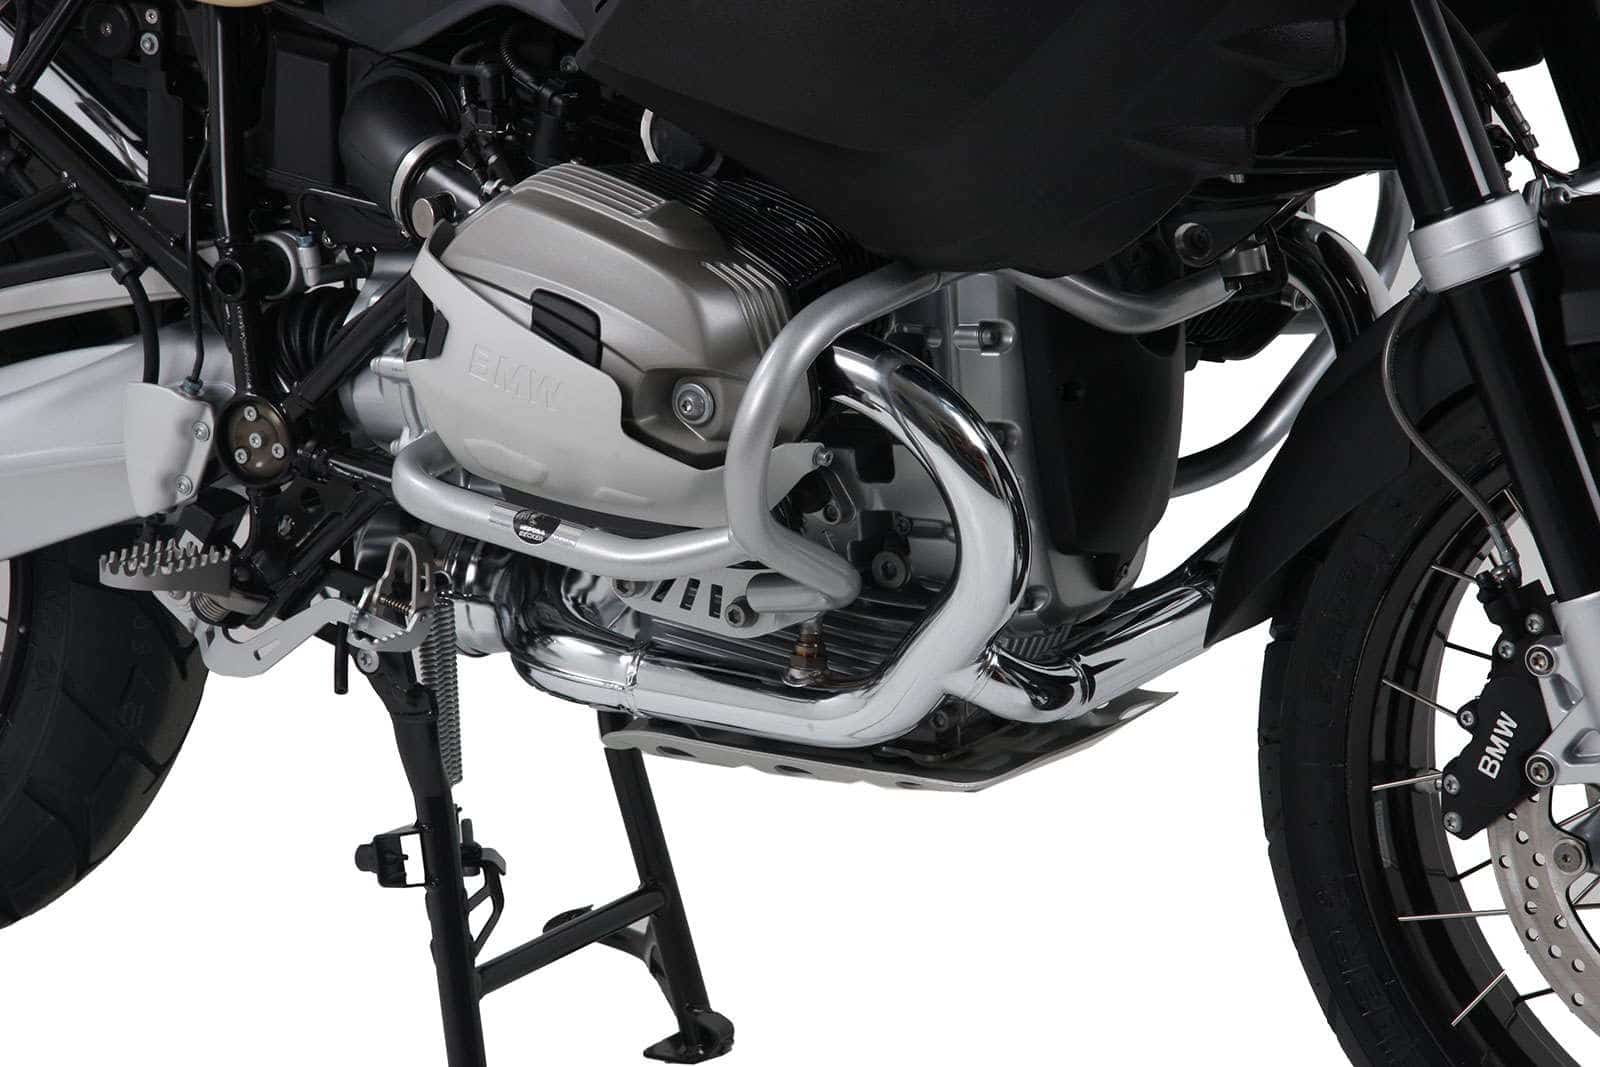 Hepco & Becker Accessories for BMW R 1200 GS (2004-2007)